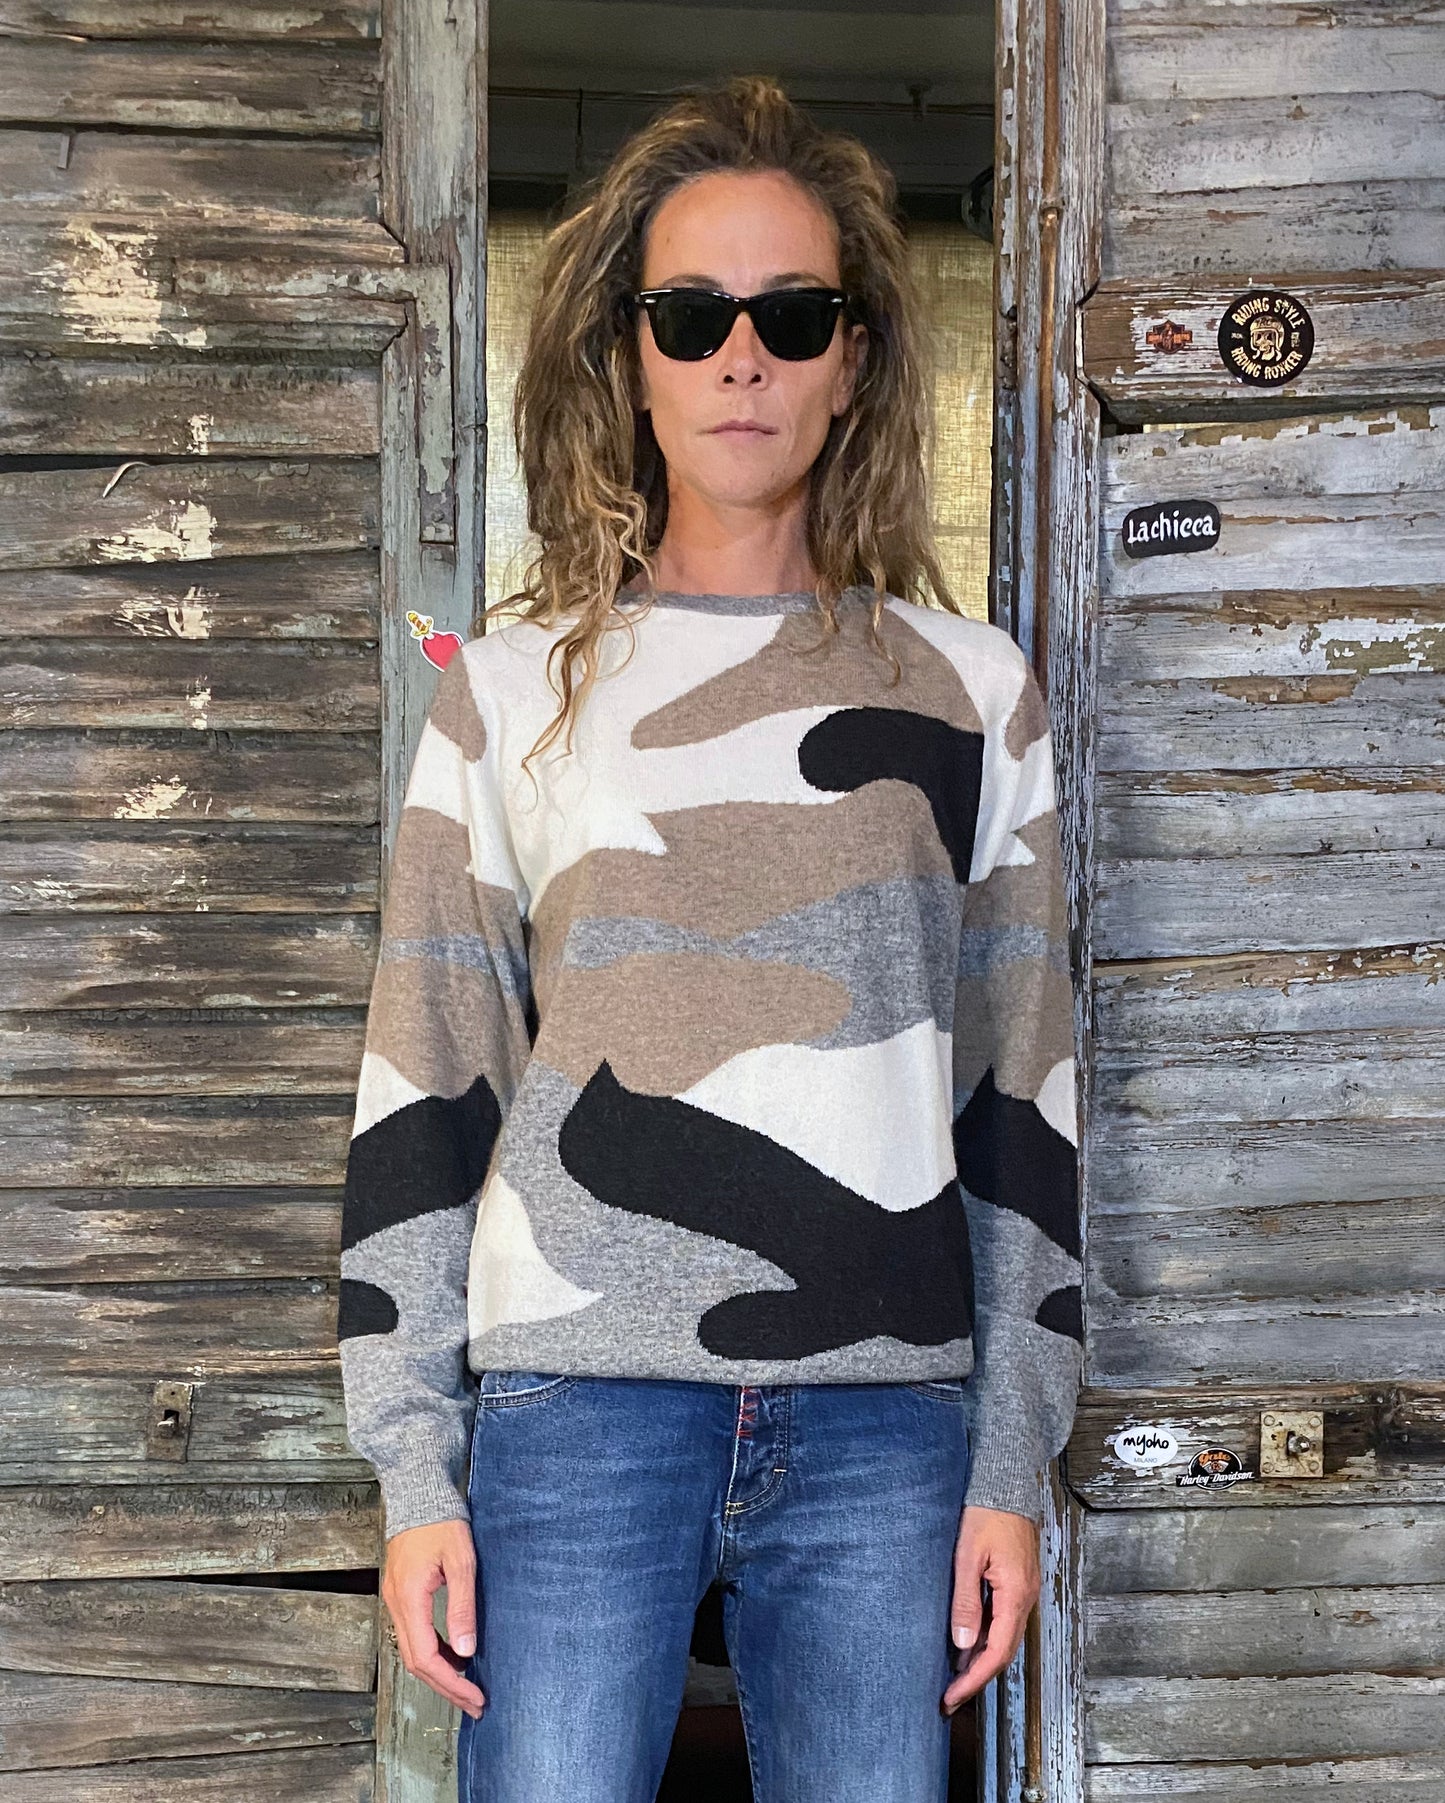 PULLOVER CASHMERE CAMOUFLAGE